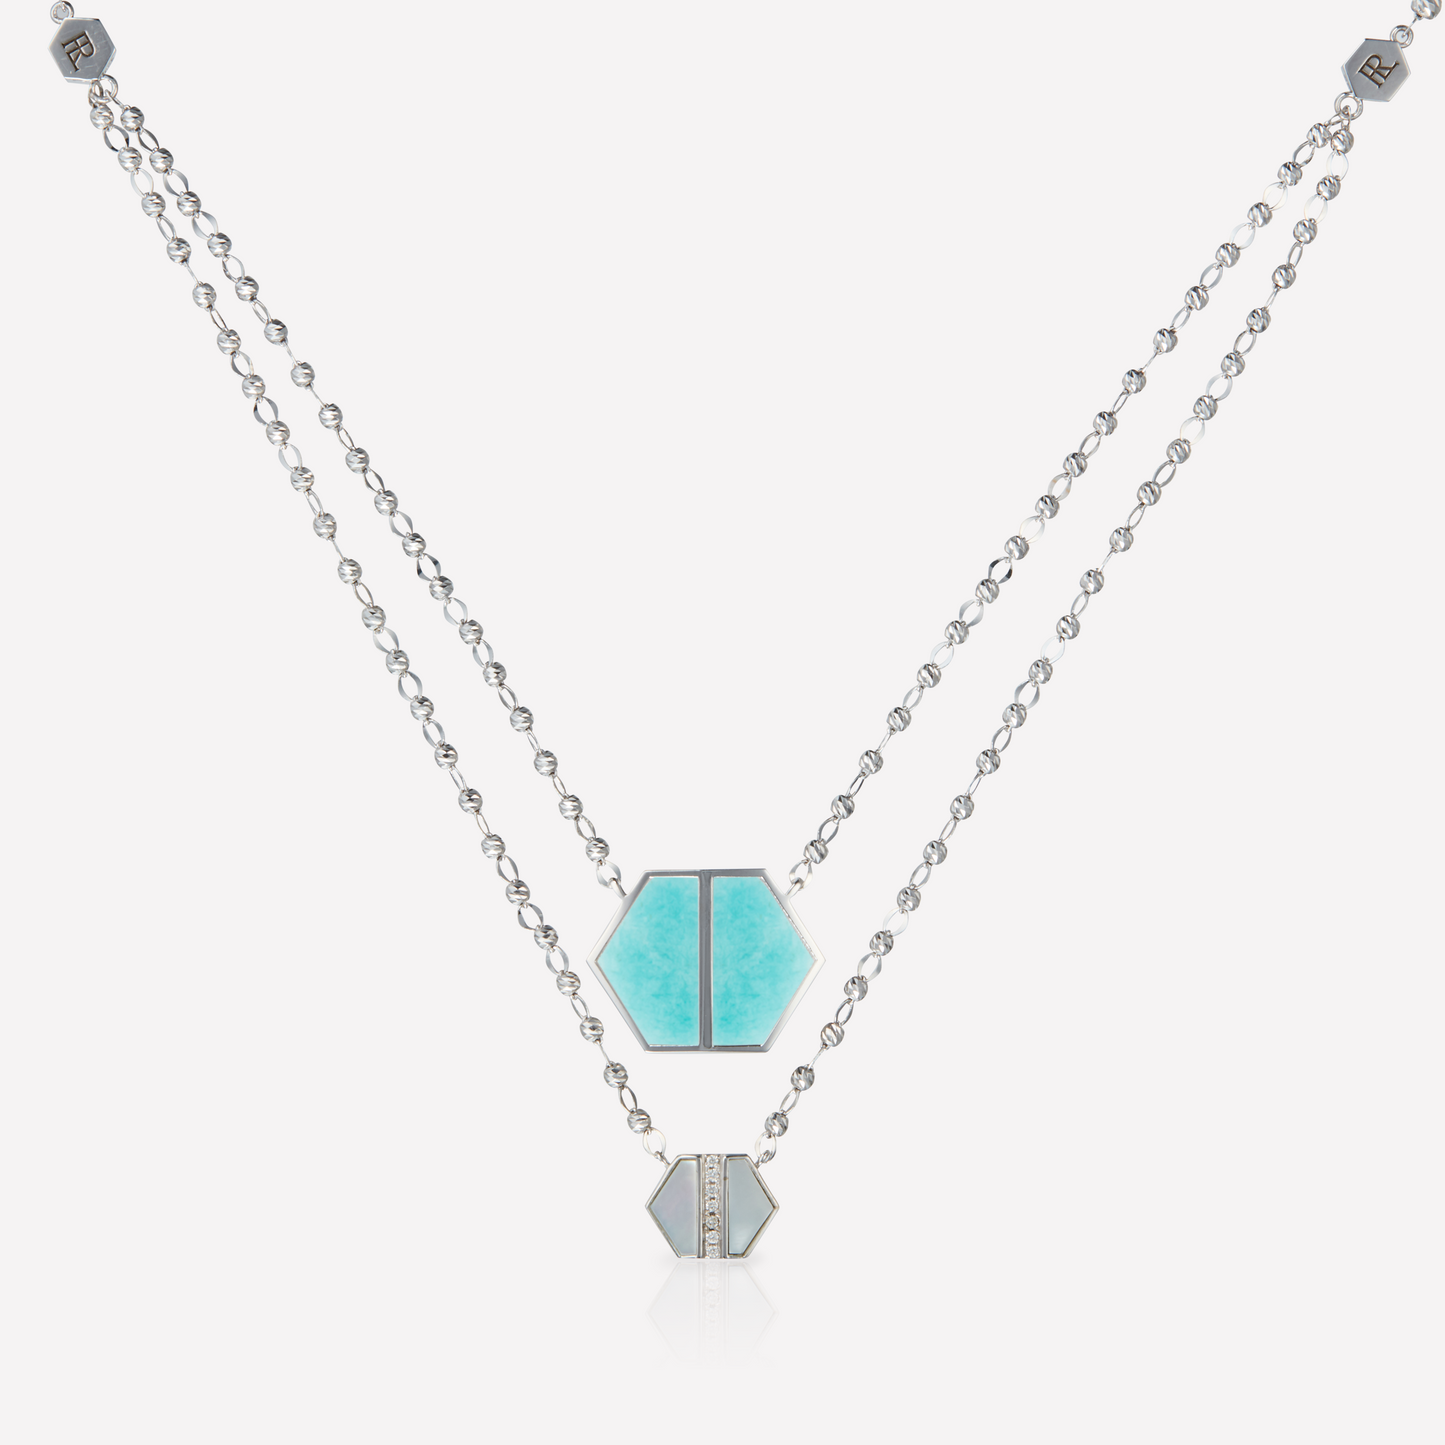 VOID Filled By You Necklace, Large, Amazonite, Diamond S